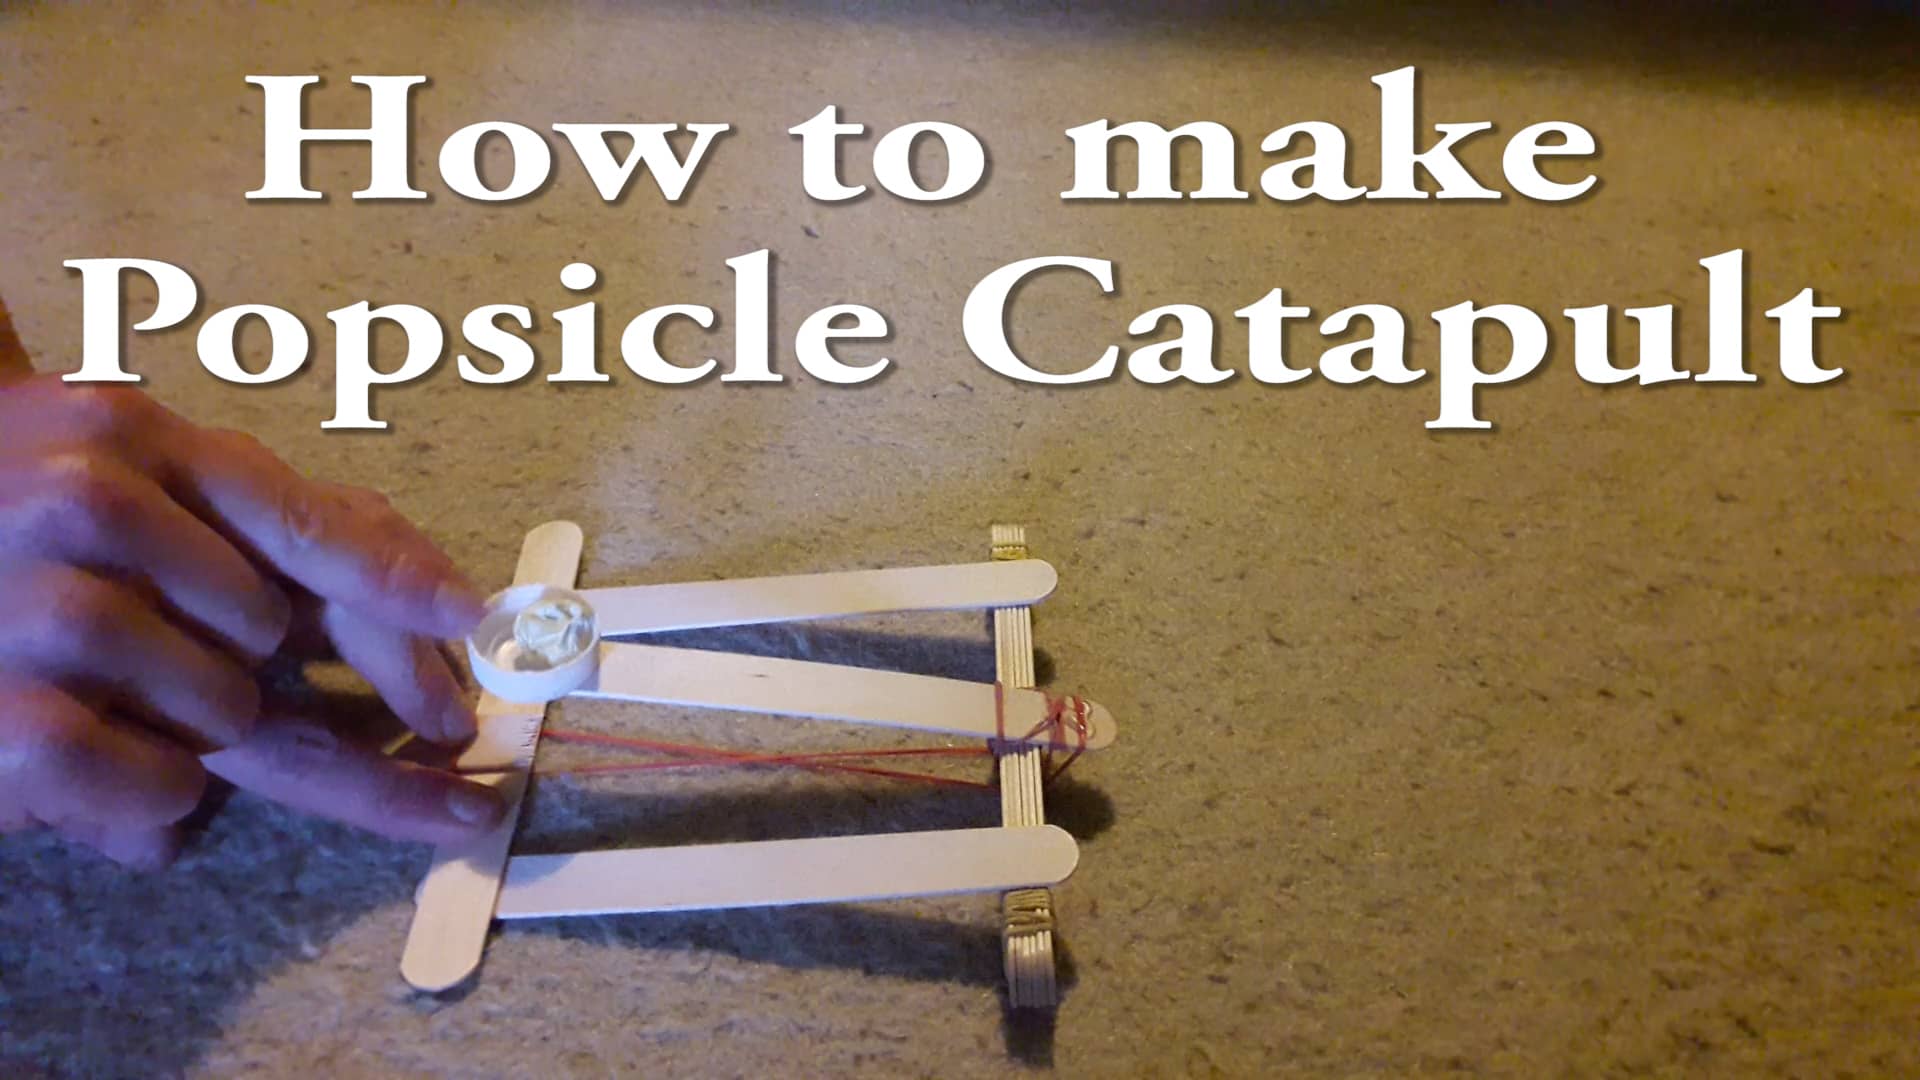 Make a lolly or popsicle stick catapult